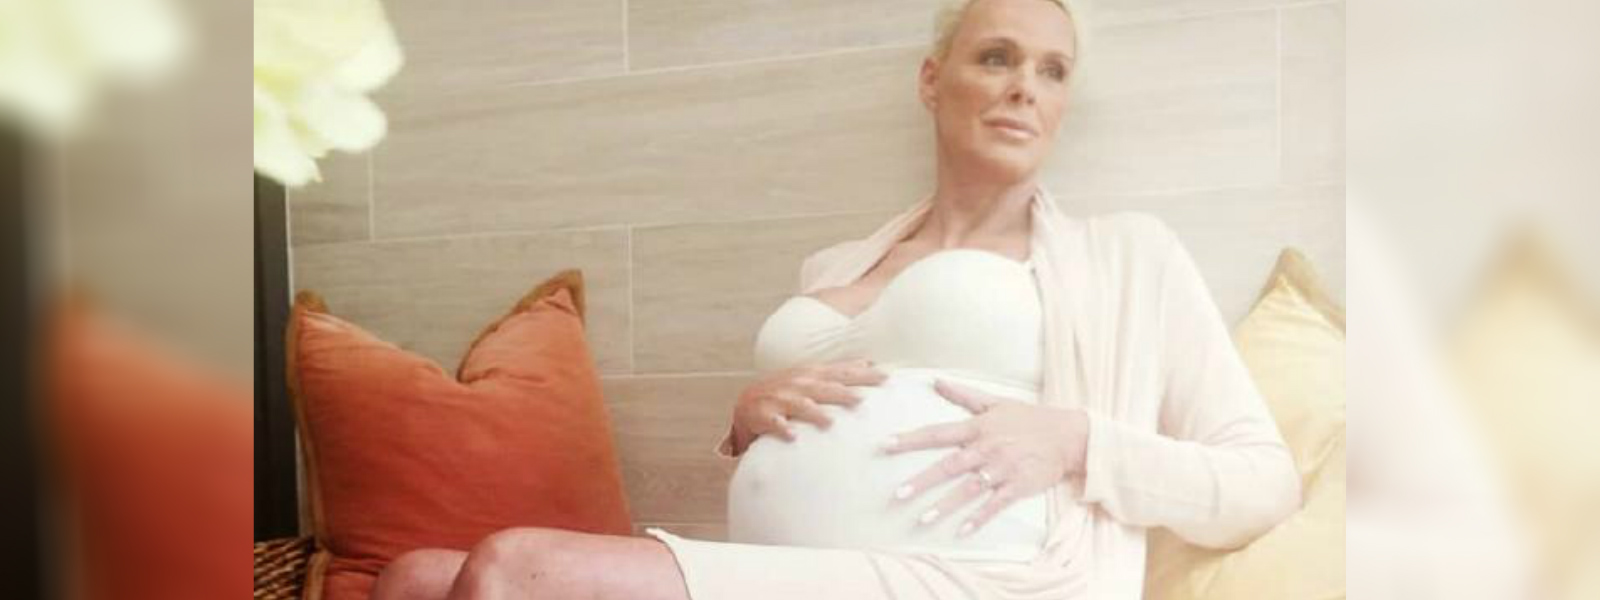 Actress Brigitte reveals she is pregnant at 54